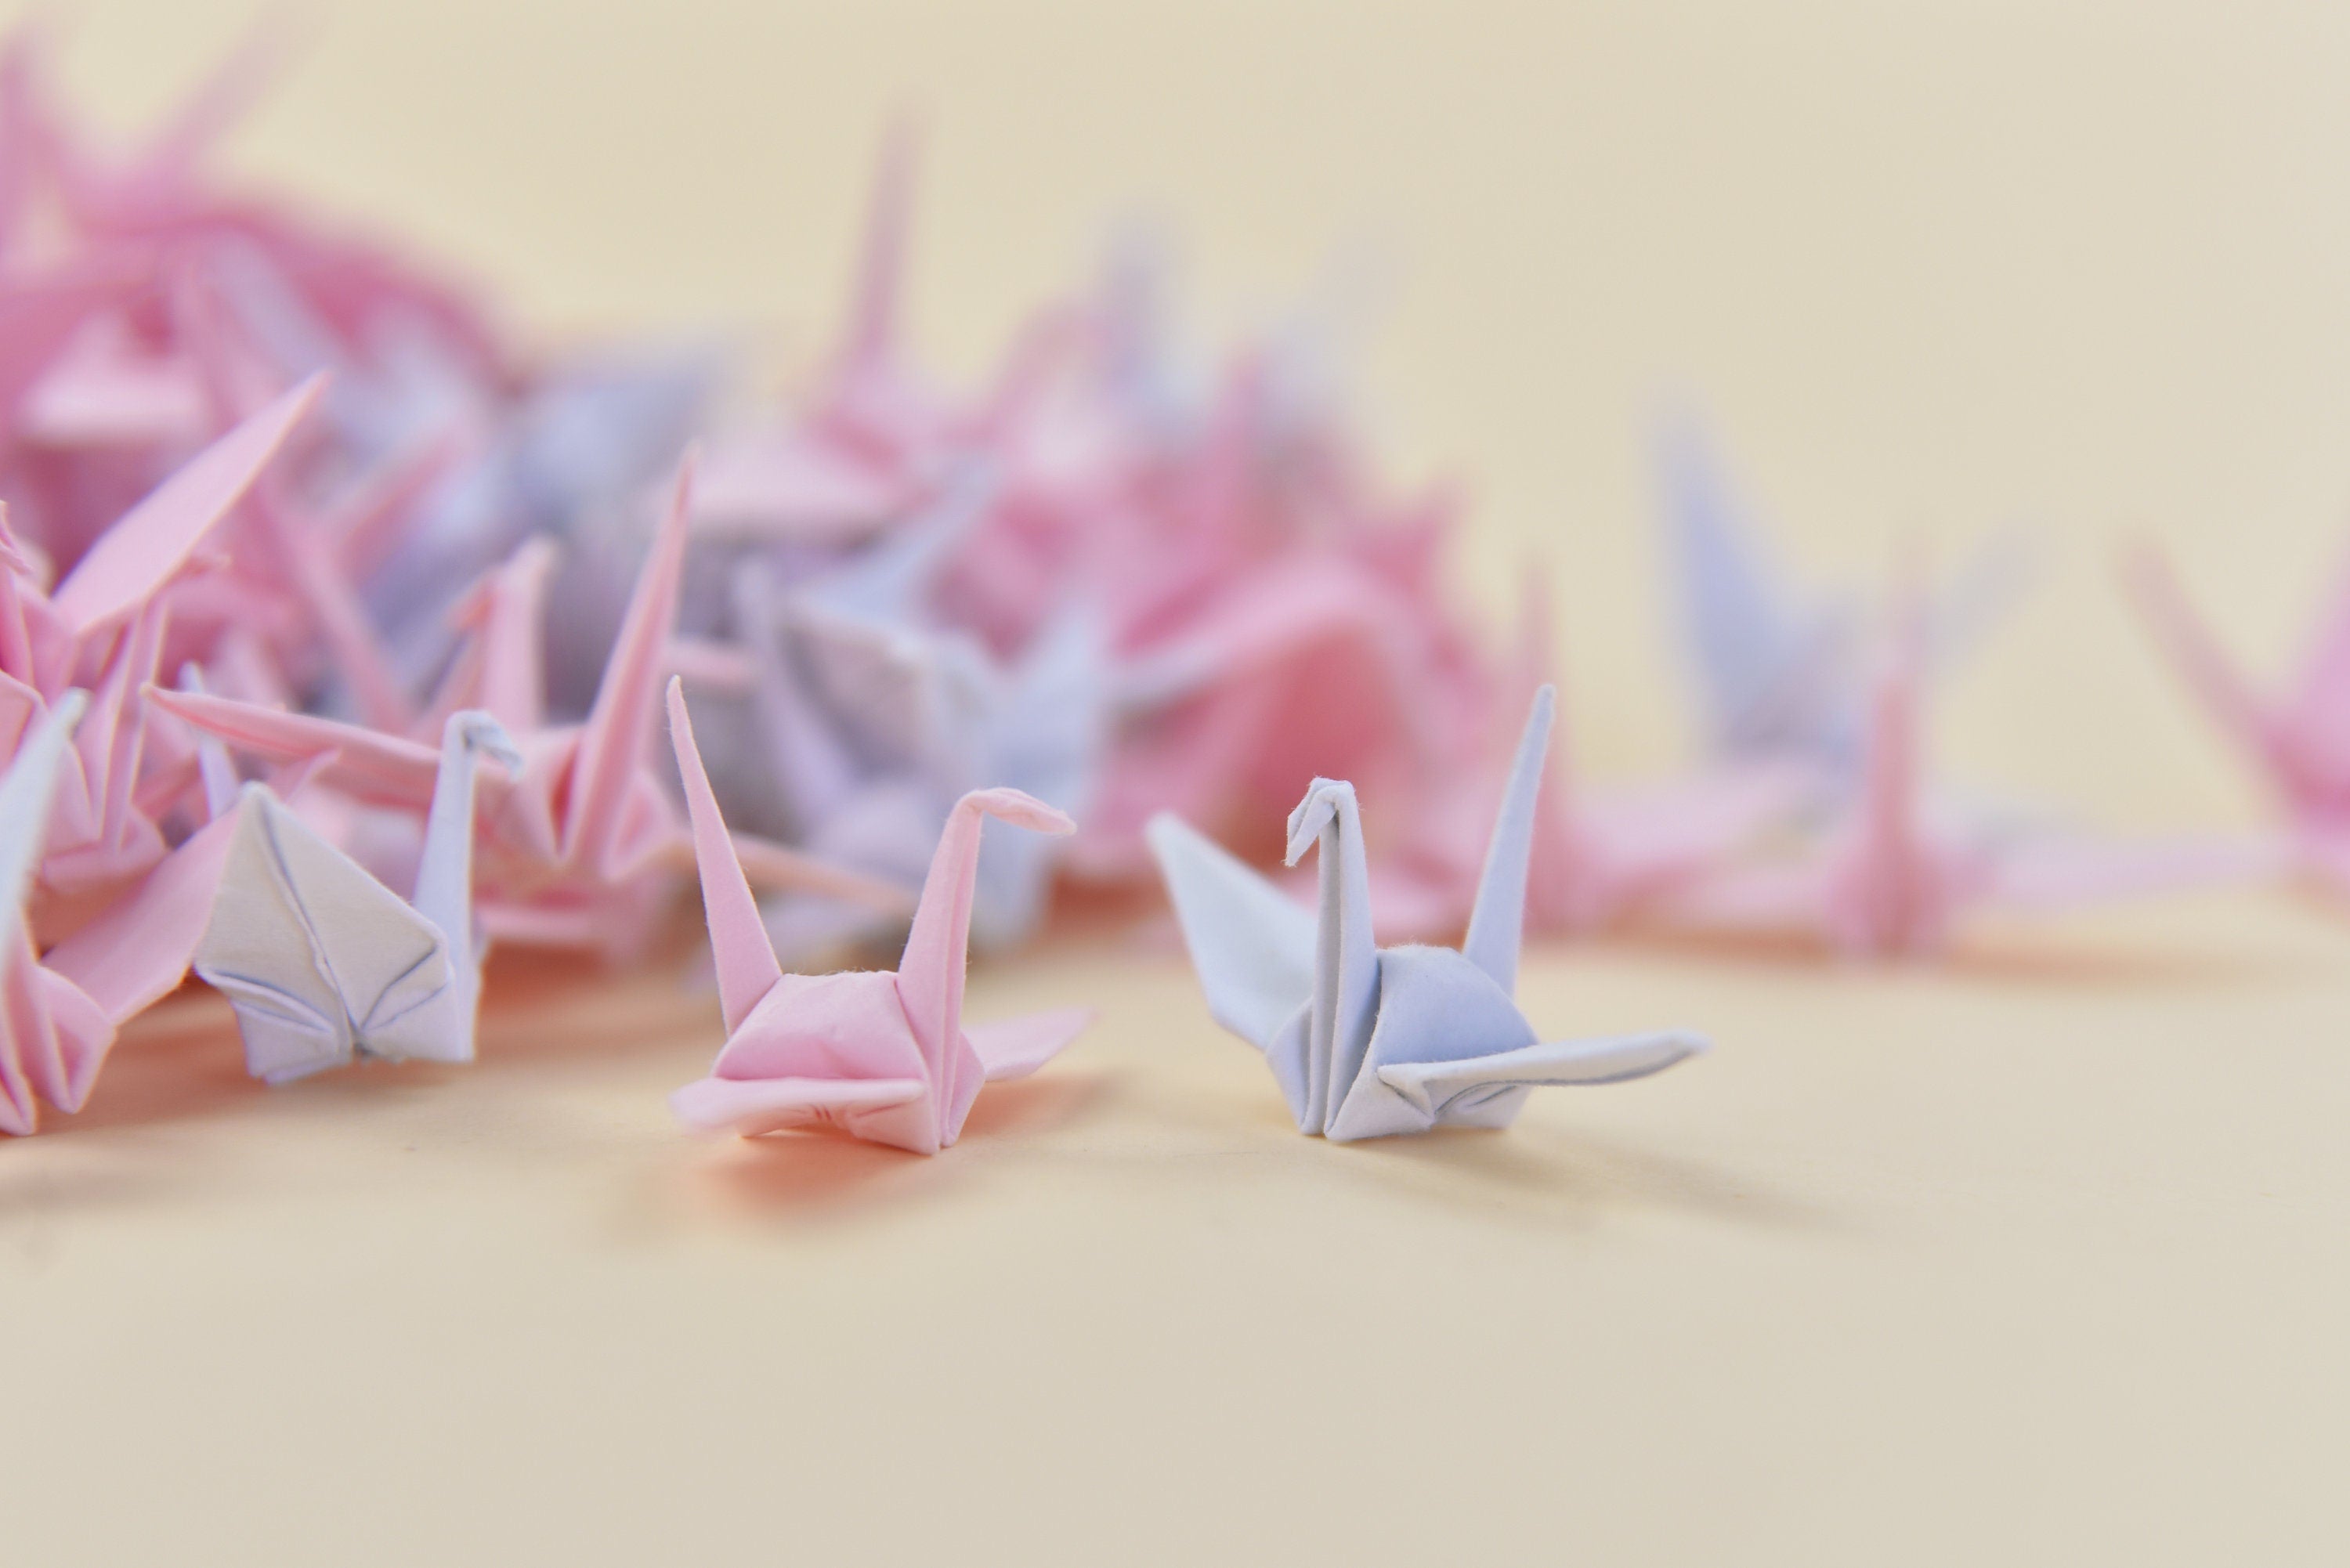 1000 Pink Shade Origami Cranes 1.5 inch Handmade Folding for Wedding, Valentine's Day by OrigamiPolly